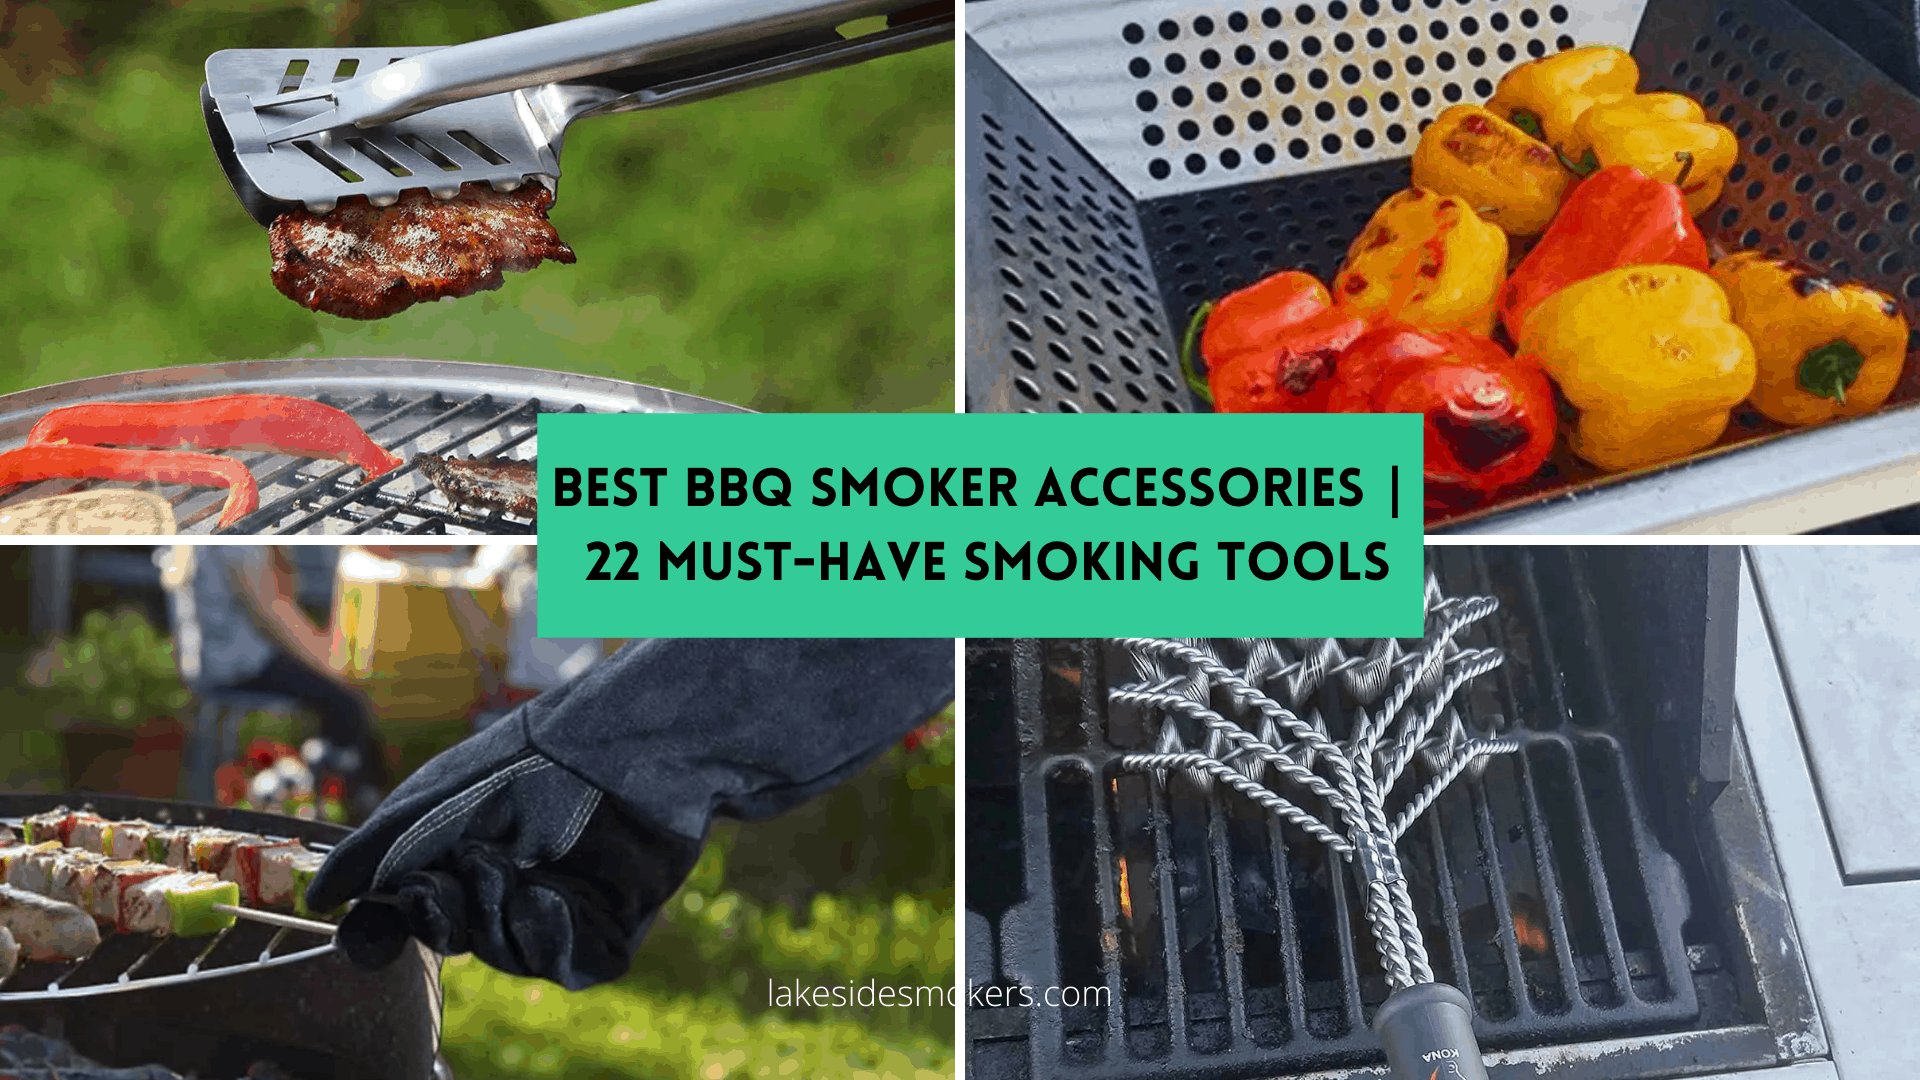 Best BBQ smoker accessories: 22 must-have smoking tools